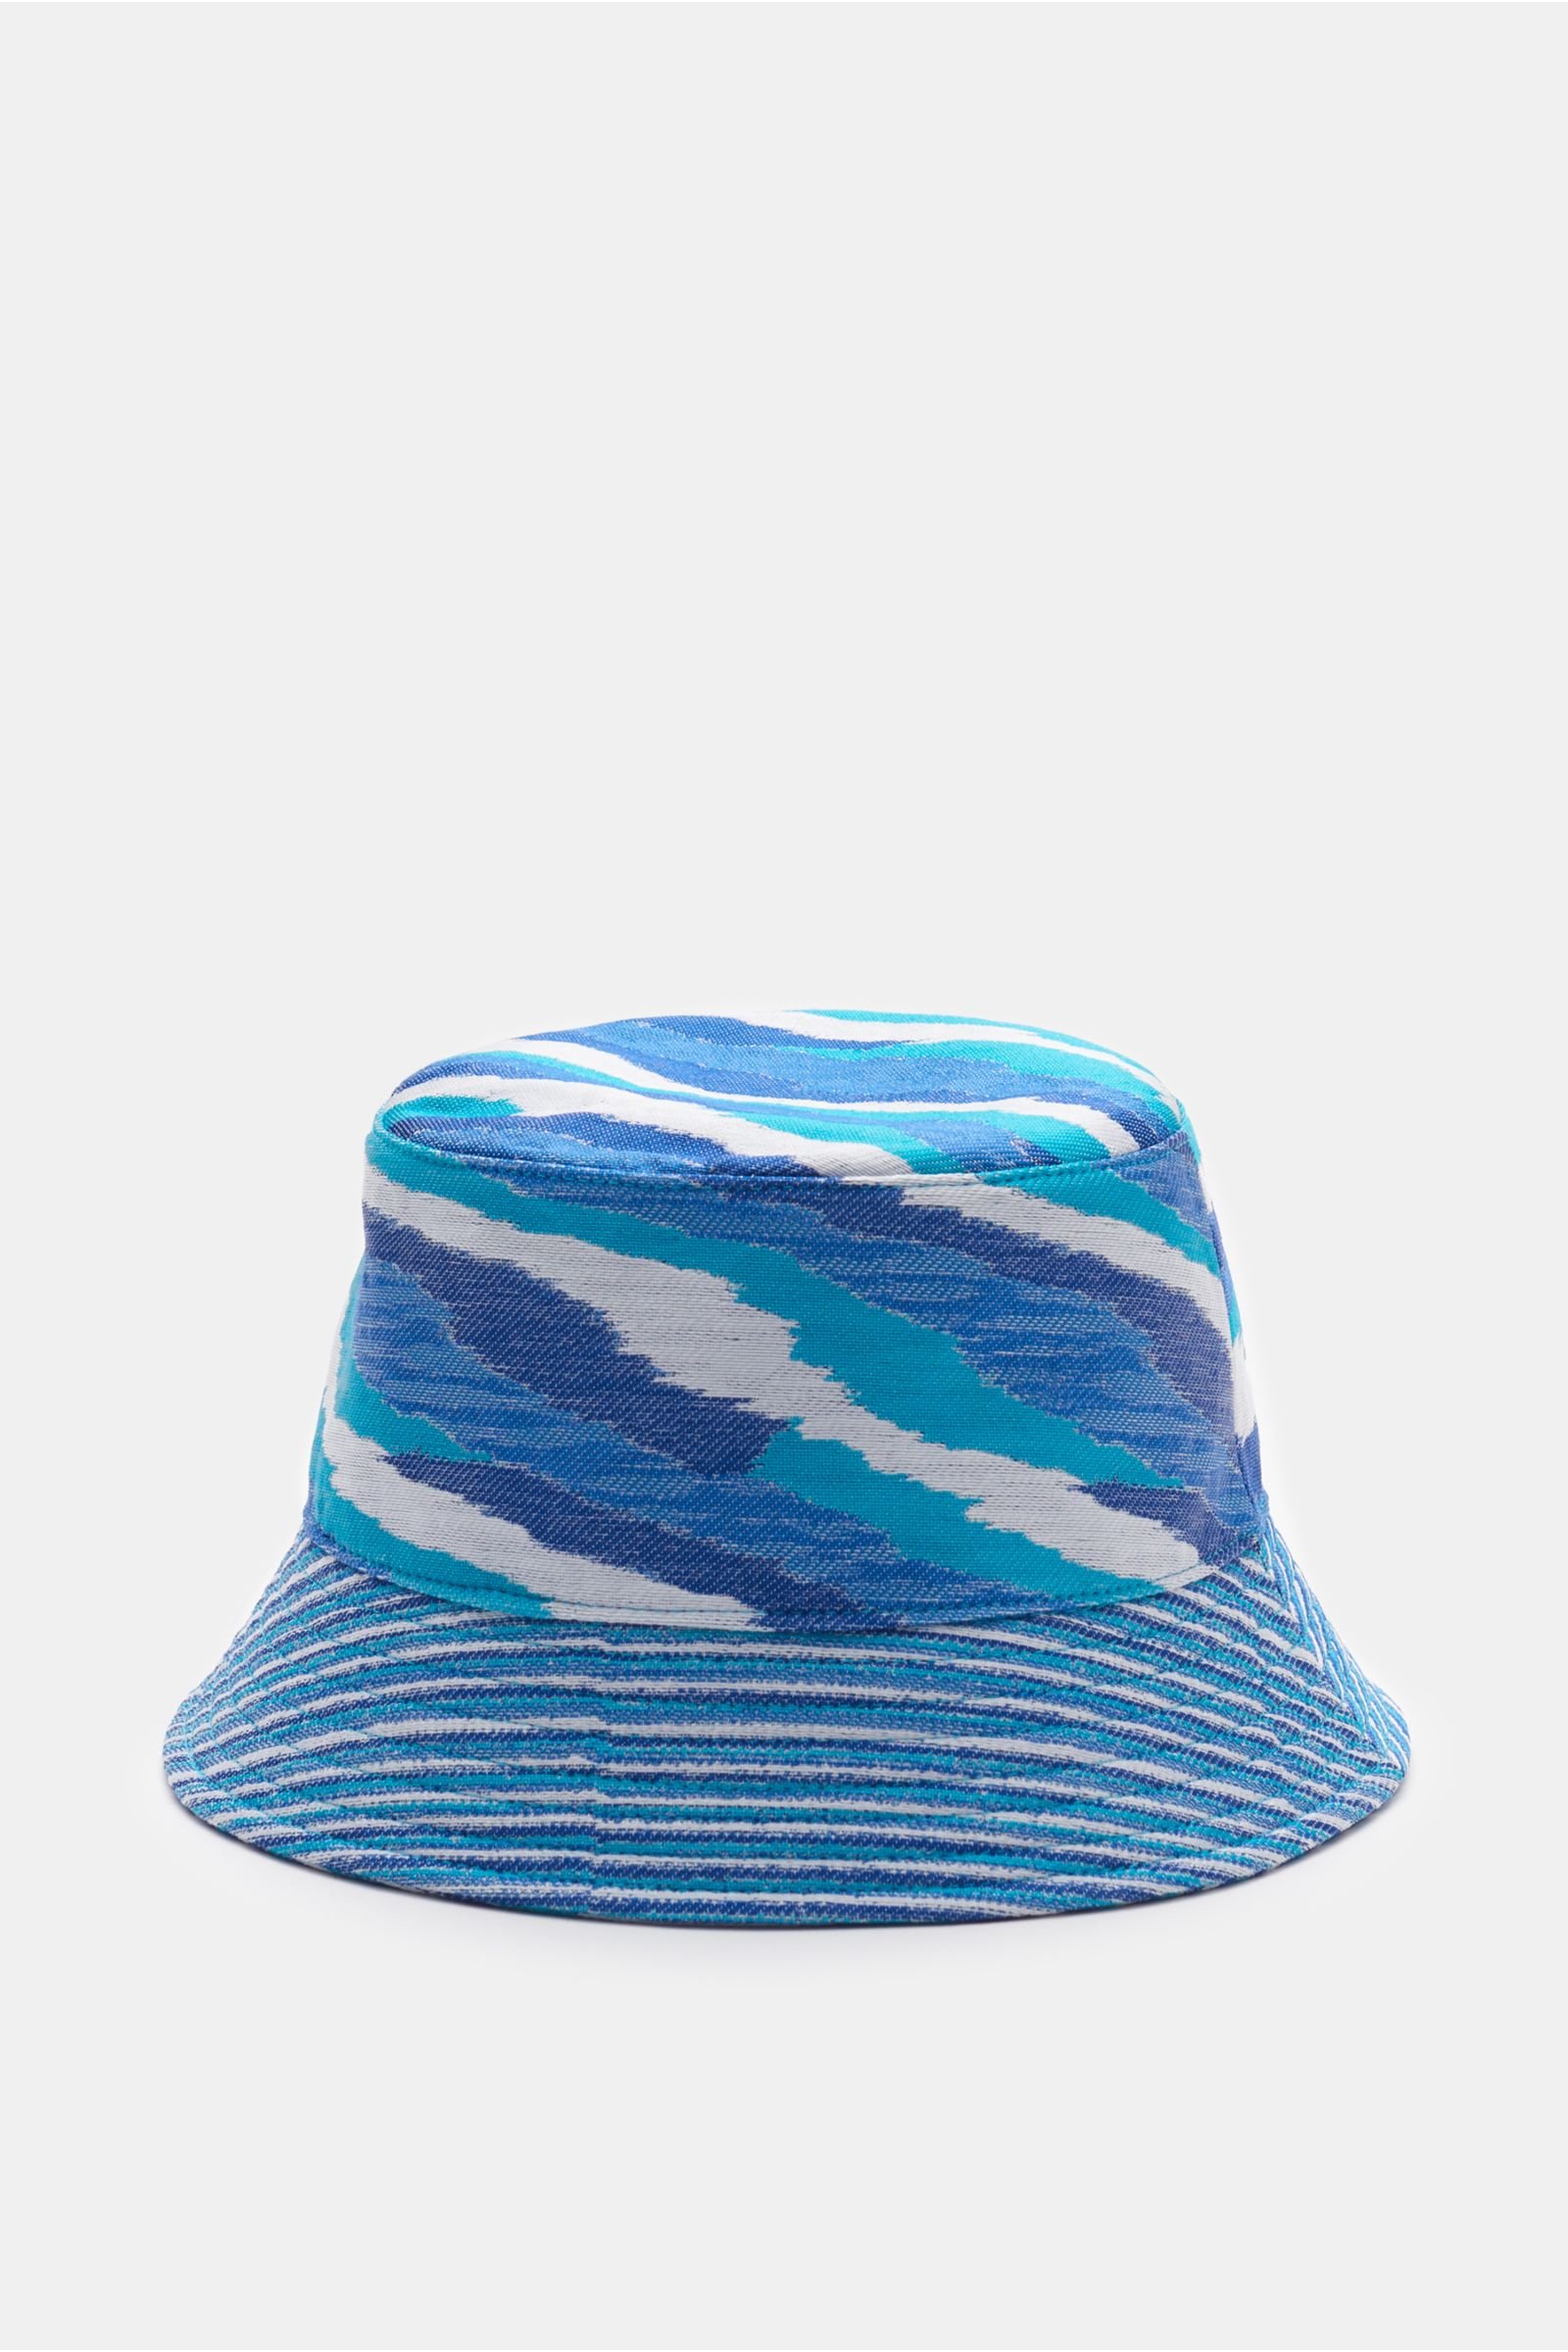 Bucket hat off-white/blue/turquoise patterned